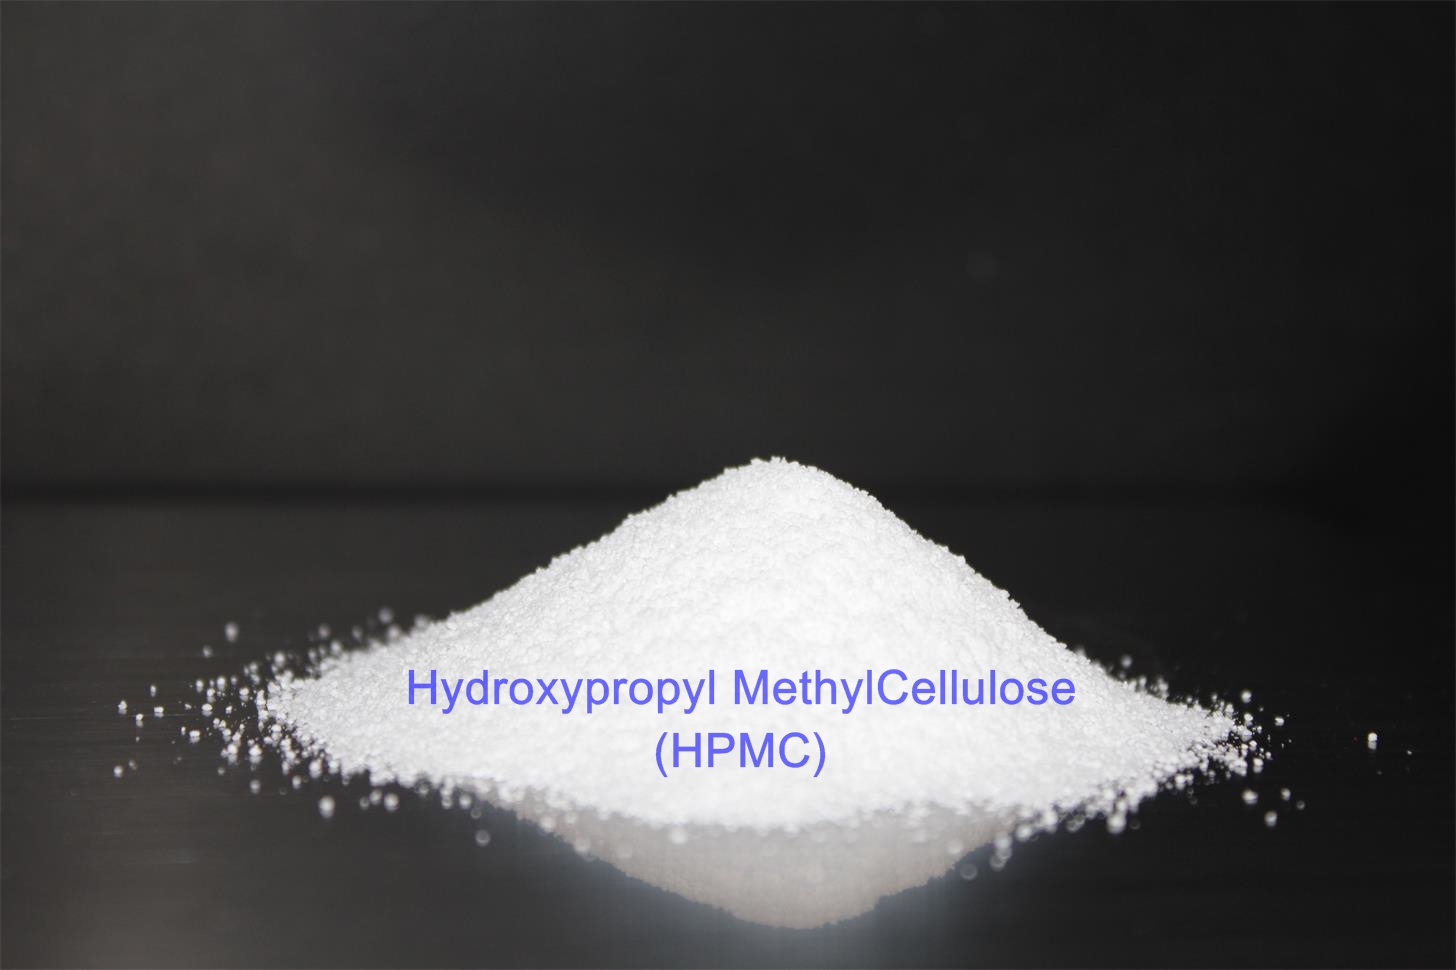 HPMC (Hydroxypropyl Methylcellulose) Market Trends, Scope, Demand, Opportunity and Forecast by 2027